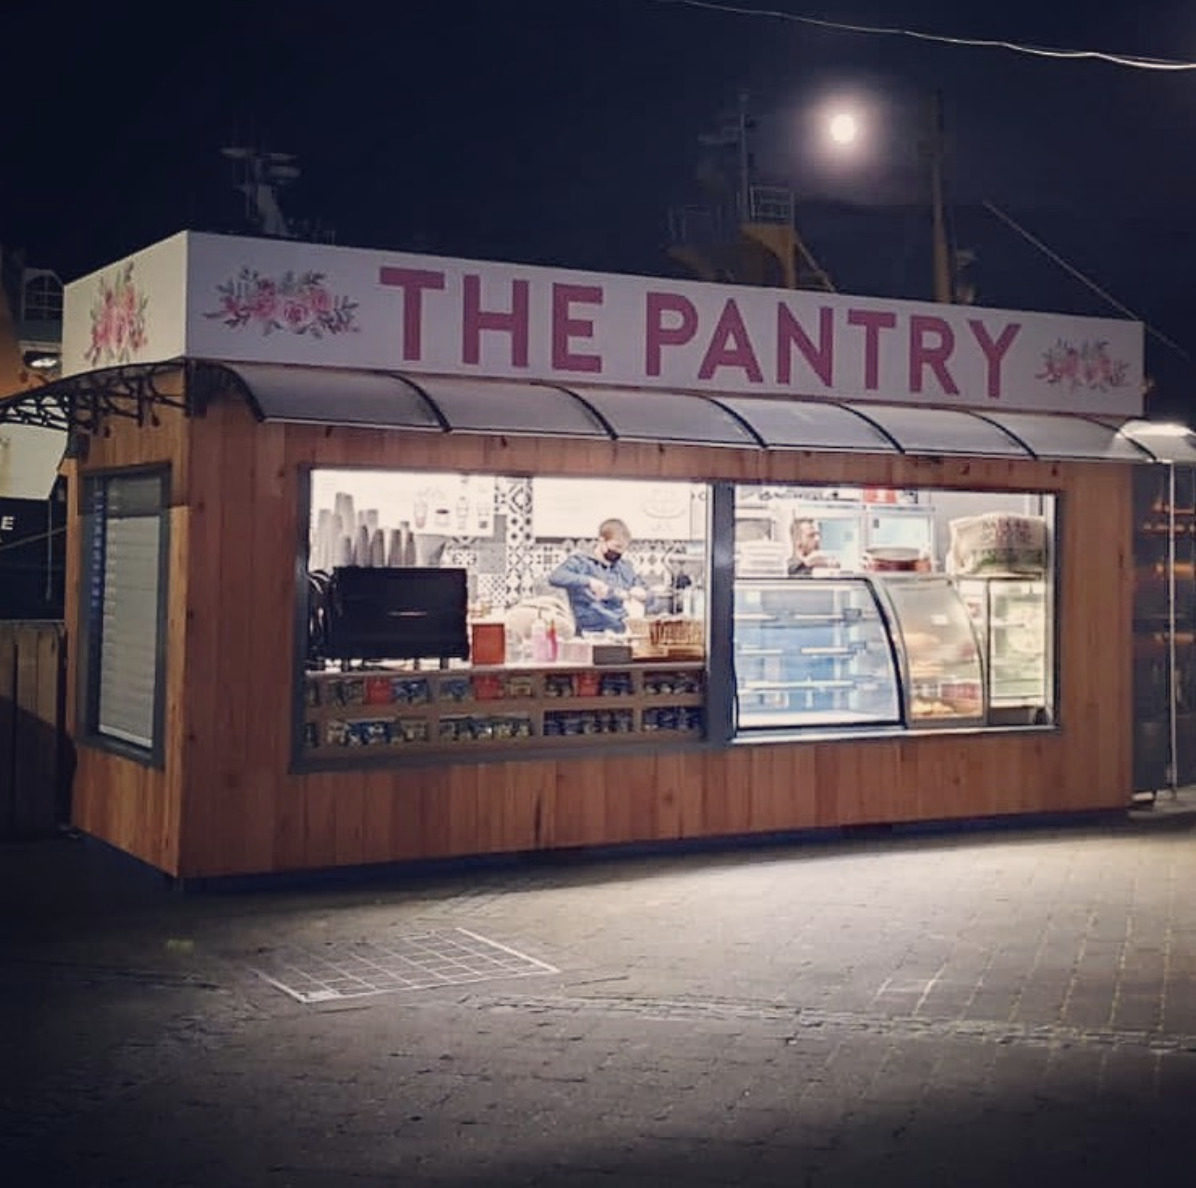 The Pantry on Wexford Quay